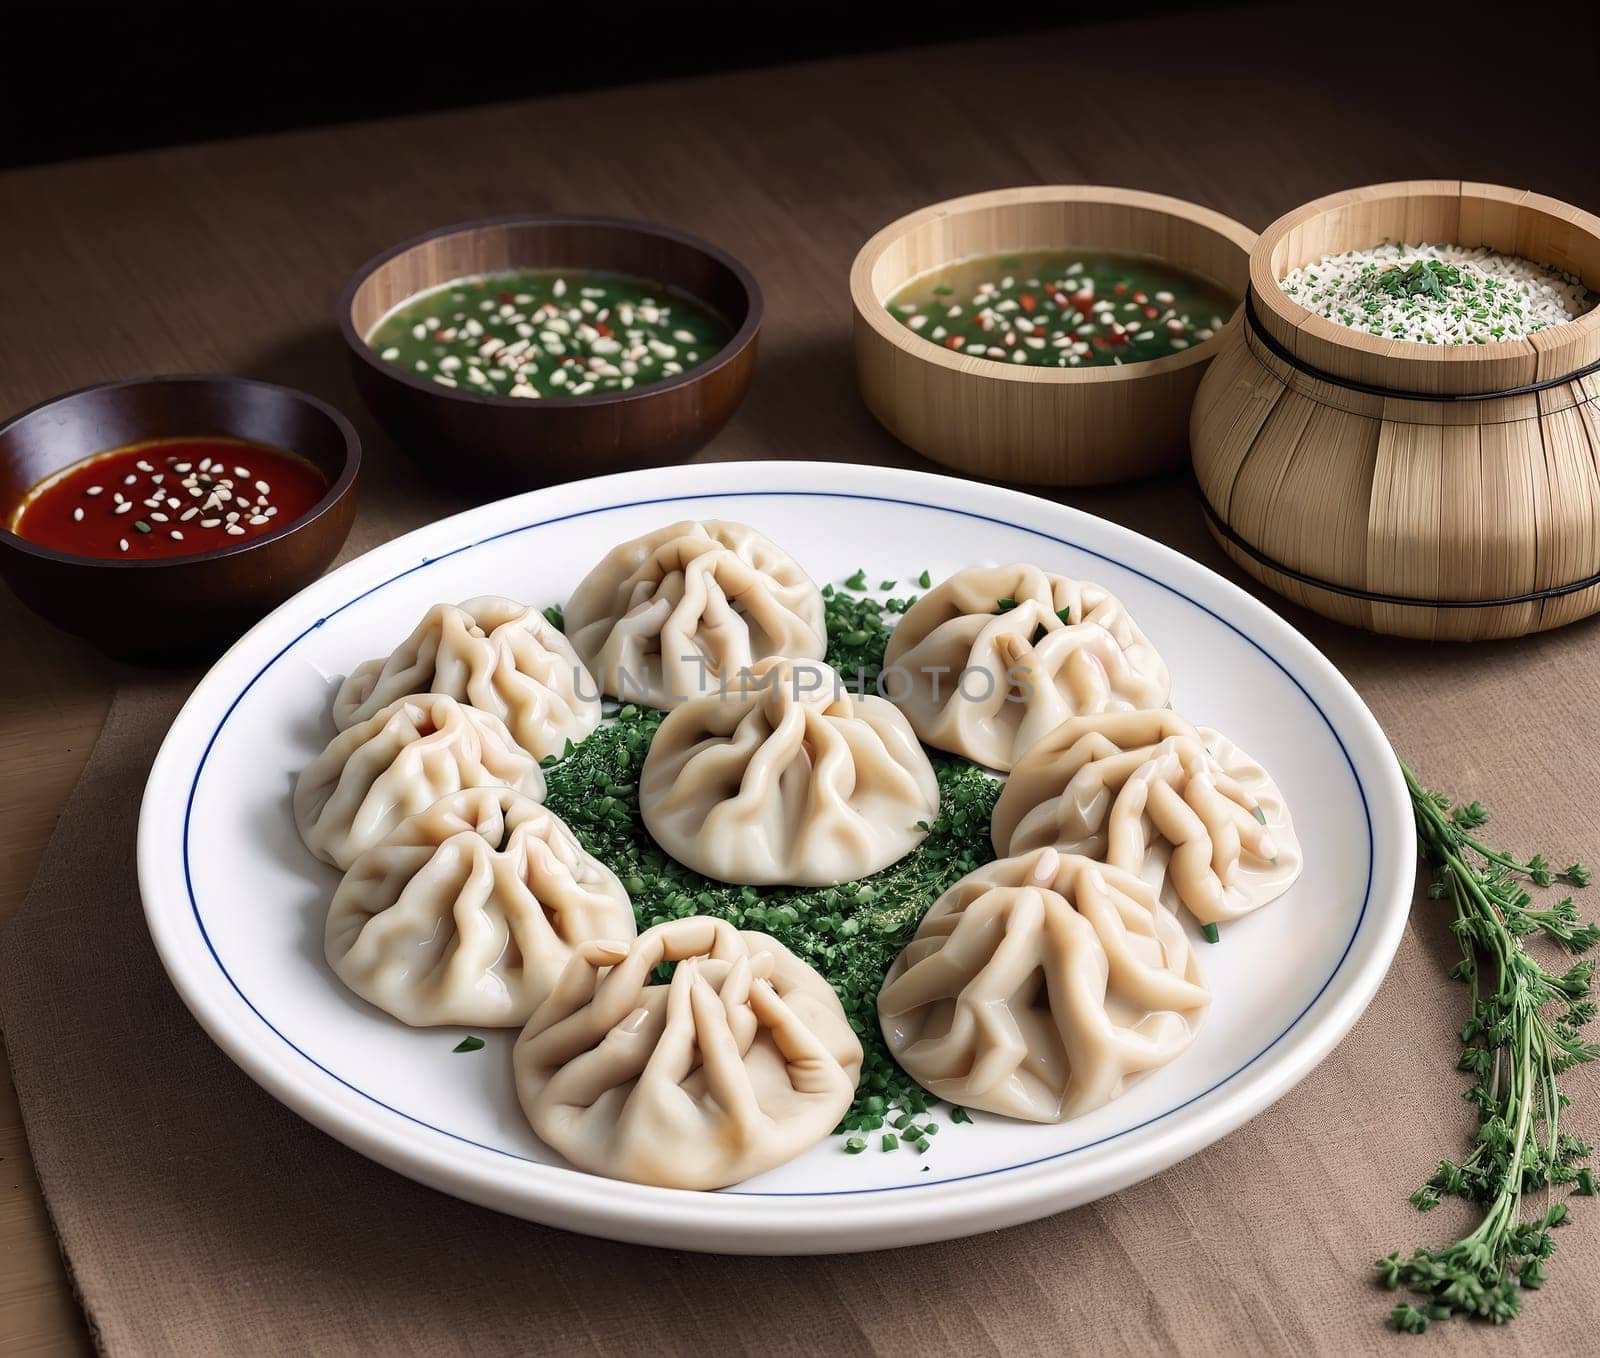 The image shows a plate of dumplings with dipping sauce and garnishes on the side.